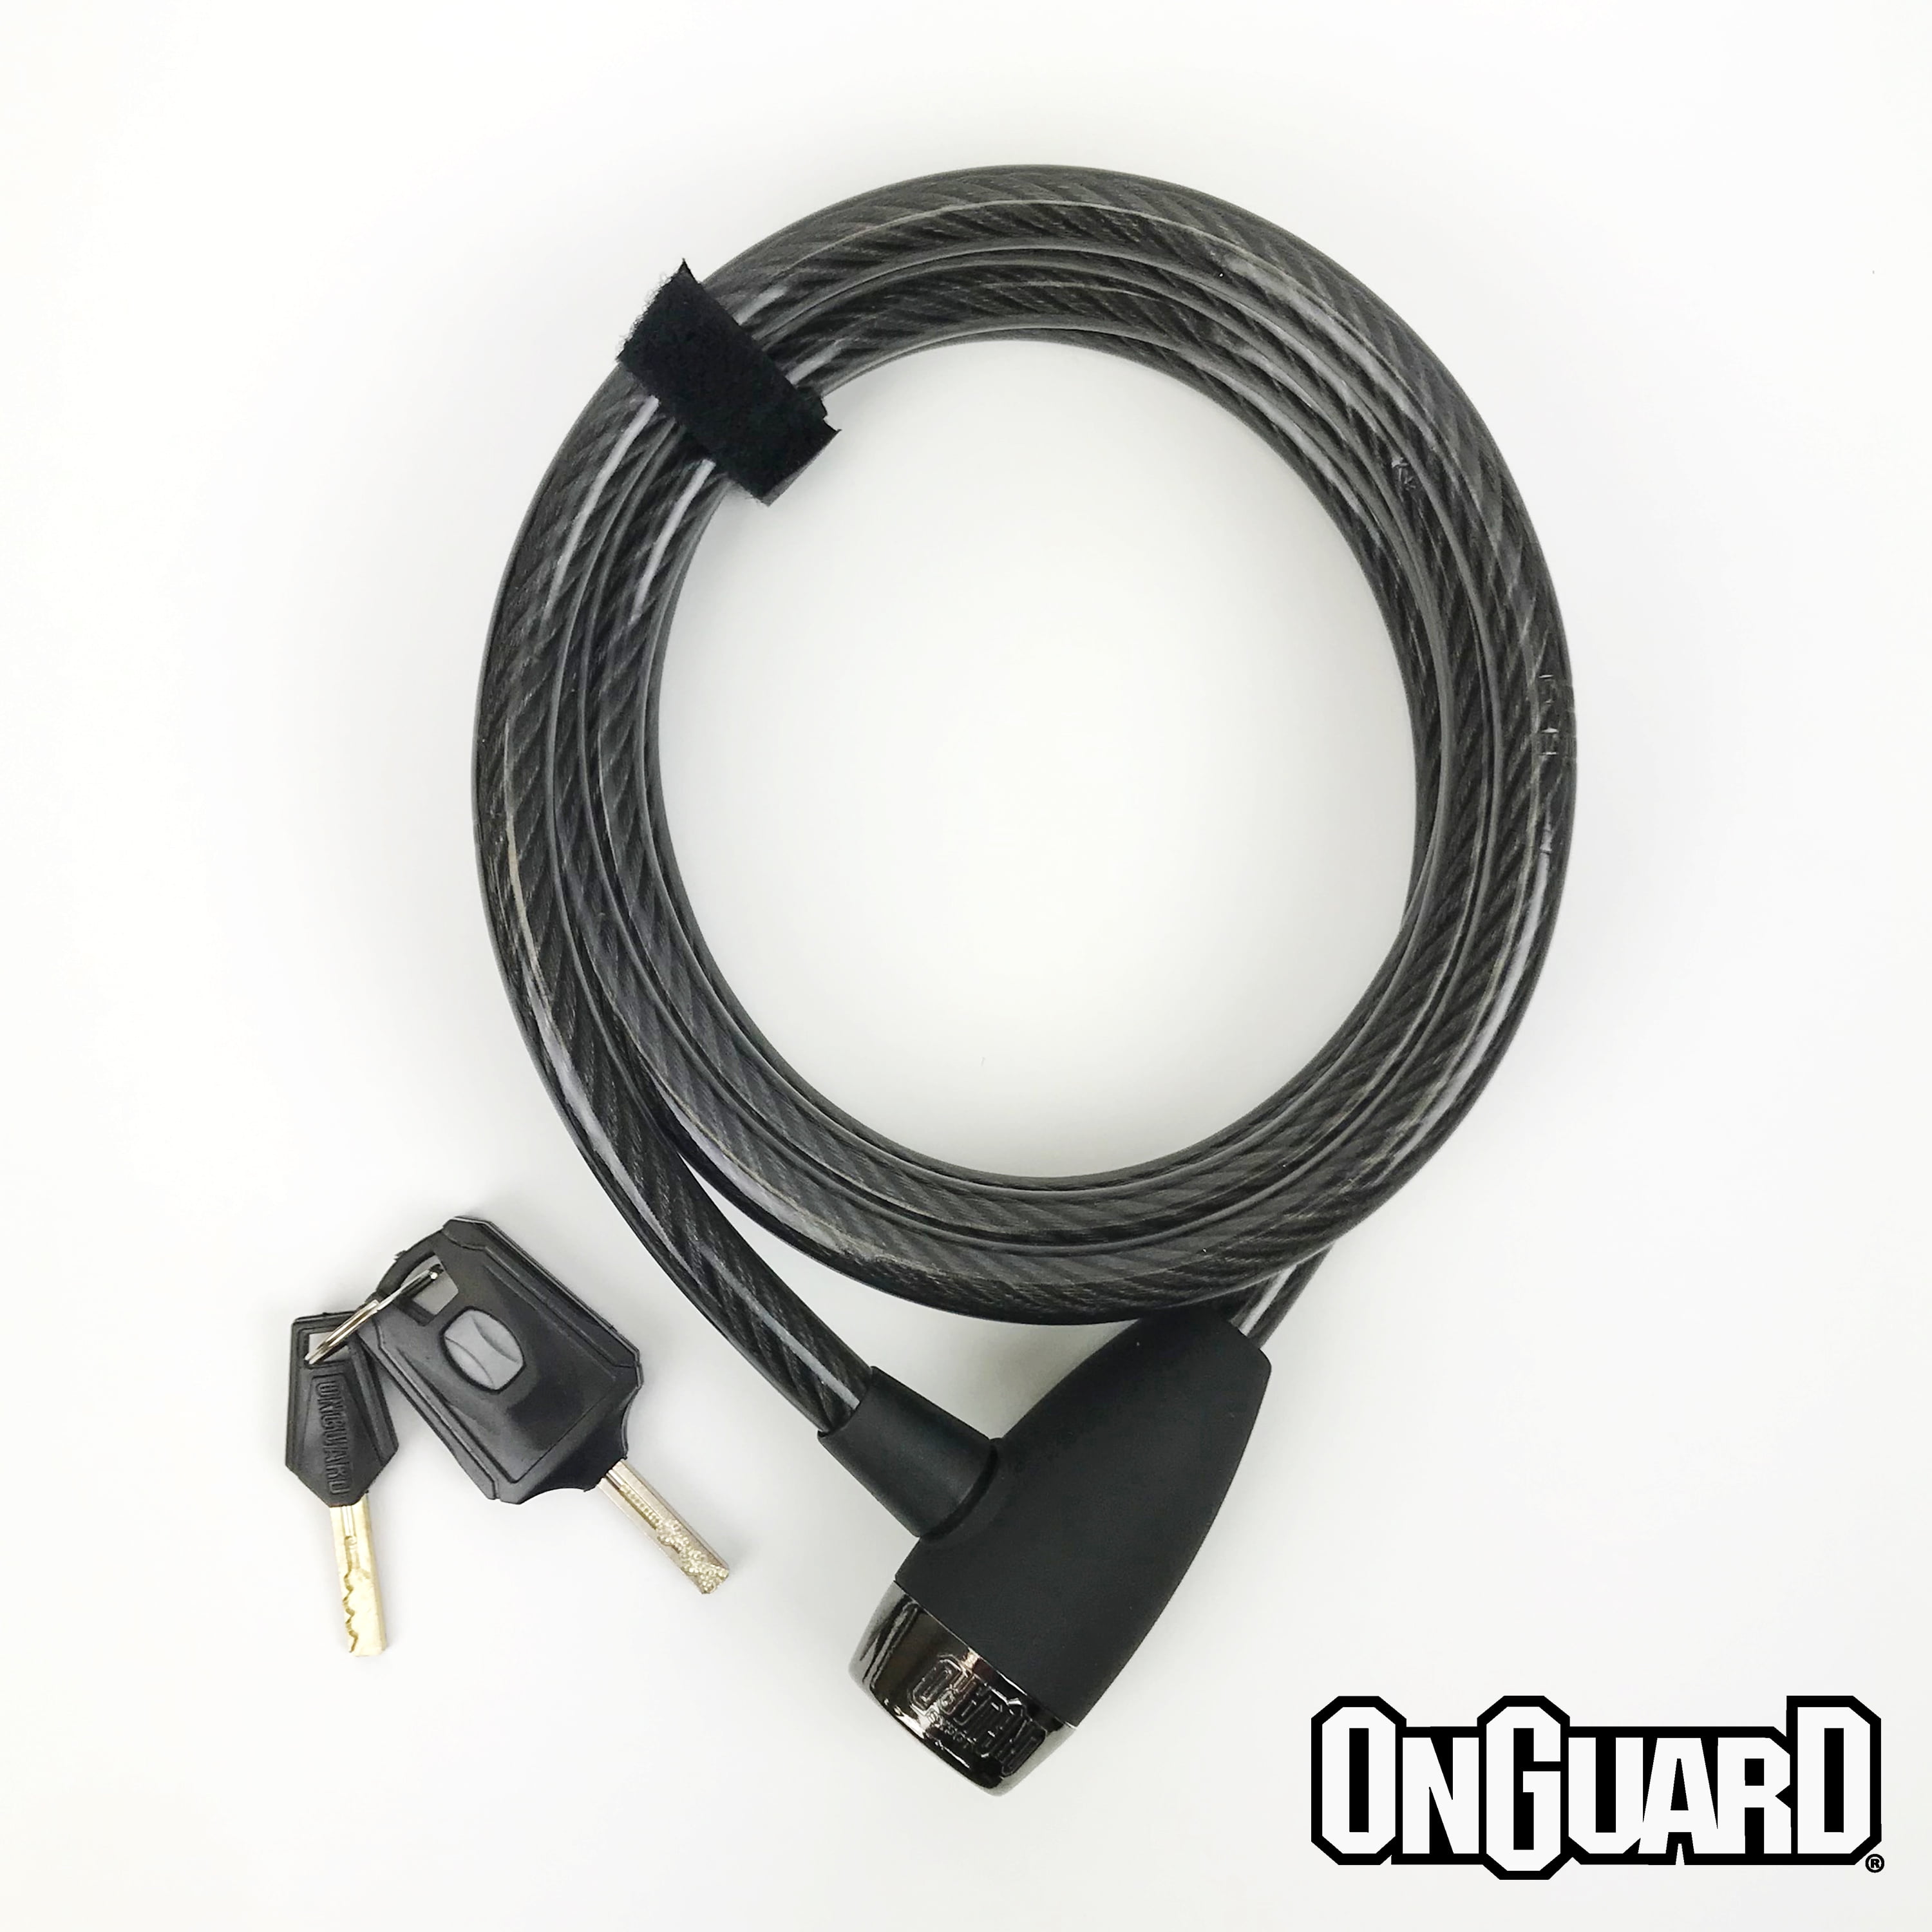 Onguard Rottweiler 8026 Armoured Bike Cable Lock Anti Theft Security For Cycles 